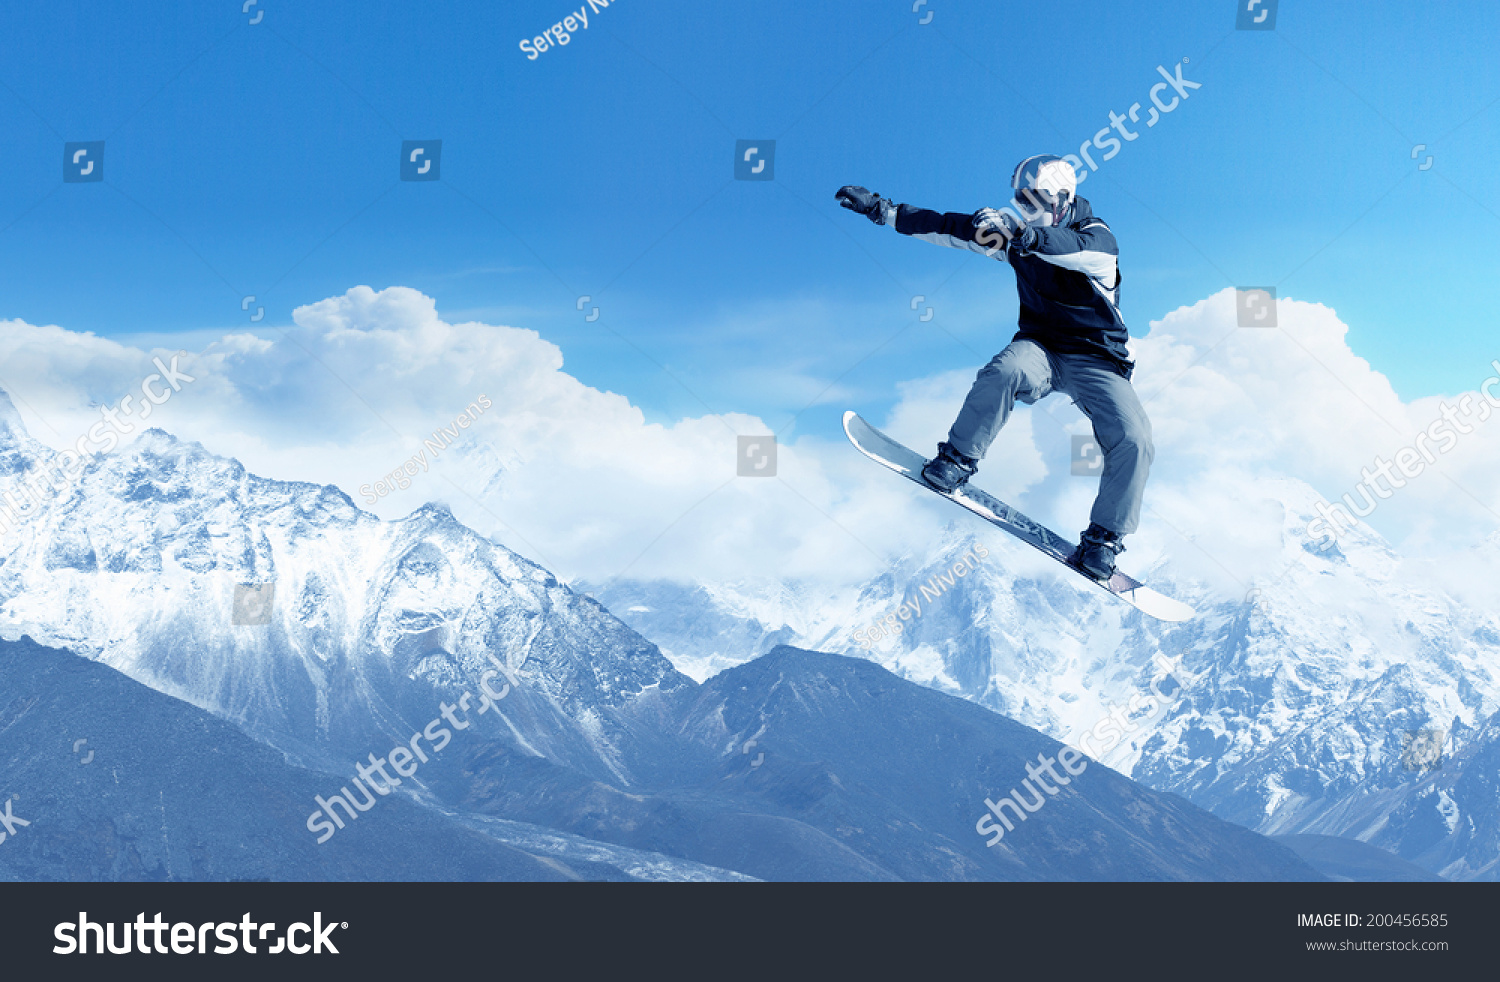 Snowboarder making jump high in clear sky #200456585